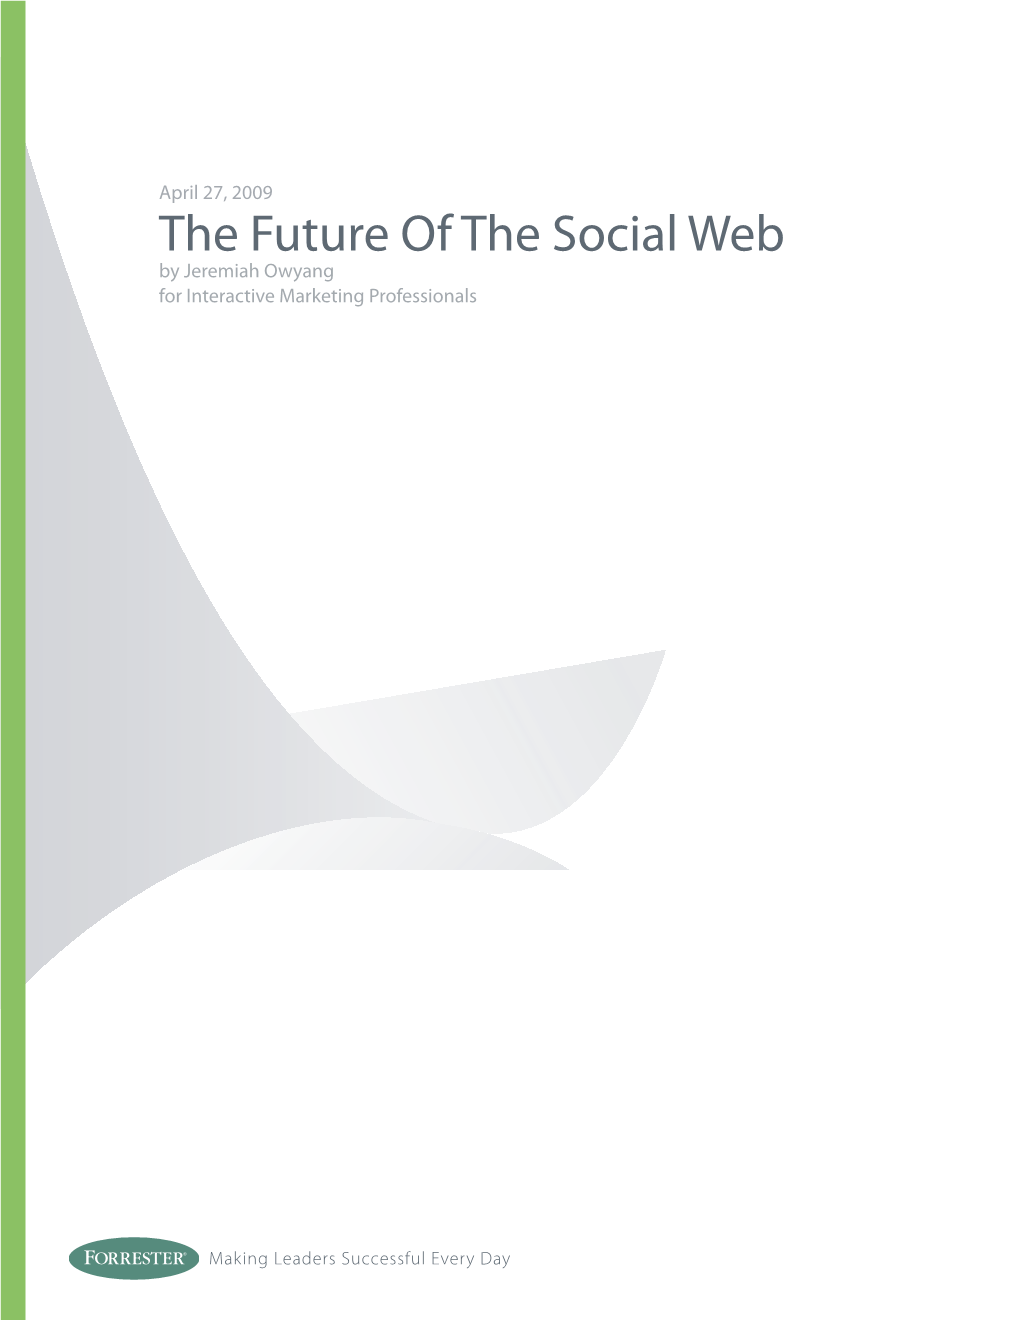 The Future of the Social Web by Jeremiah Owyang for Interactive Marketing Professionals